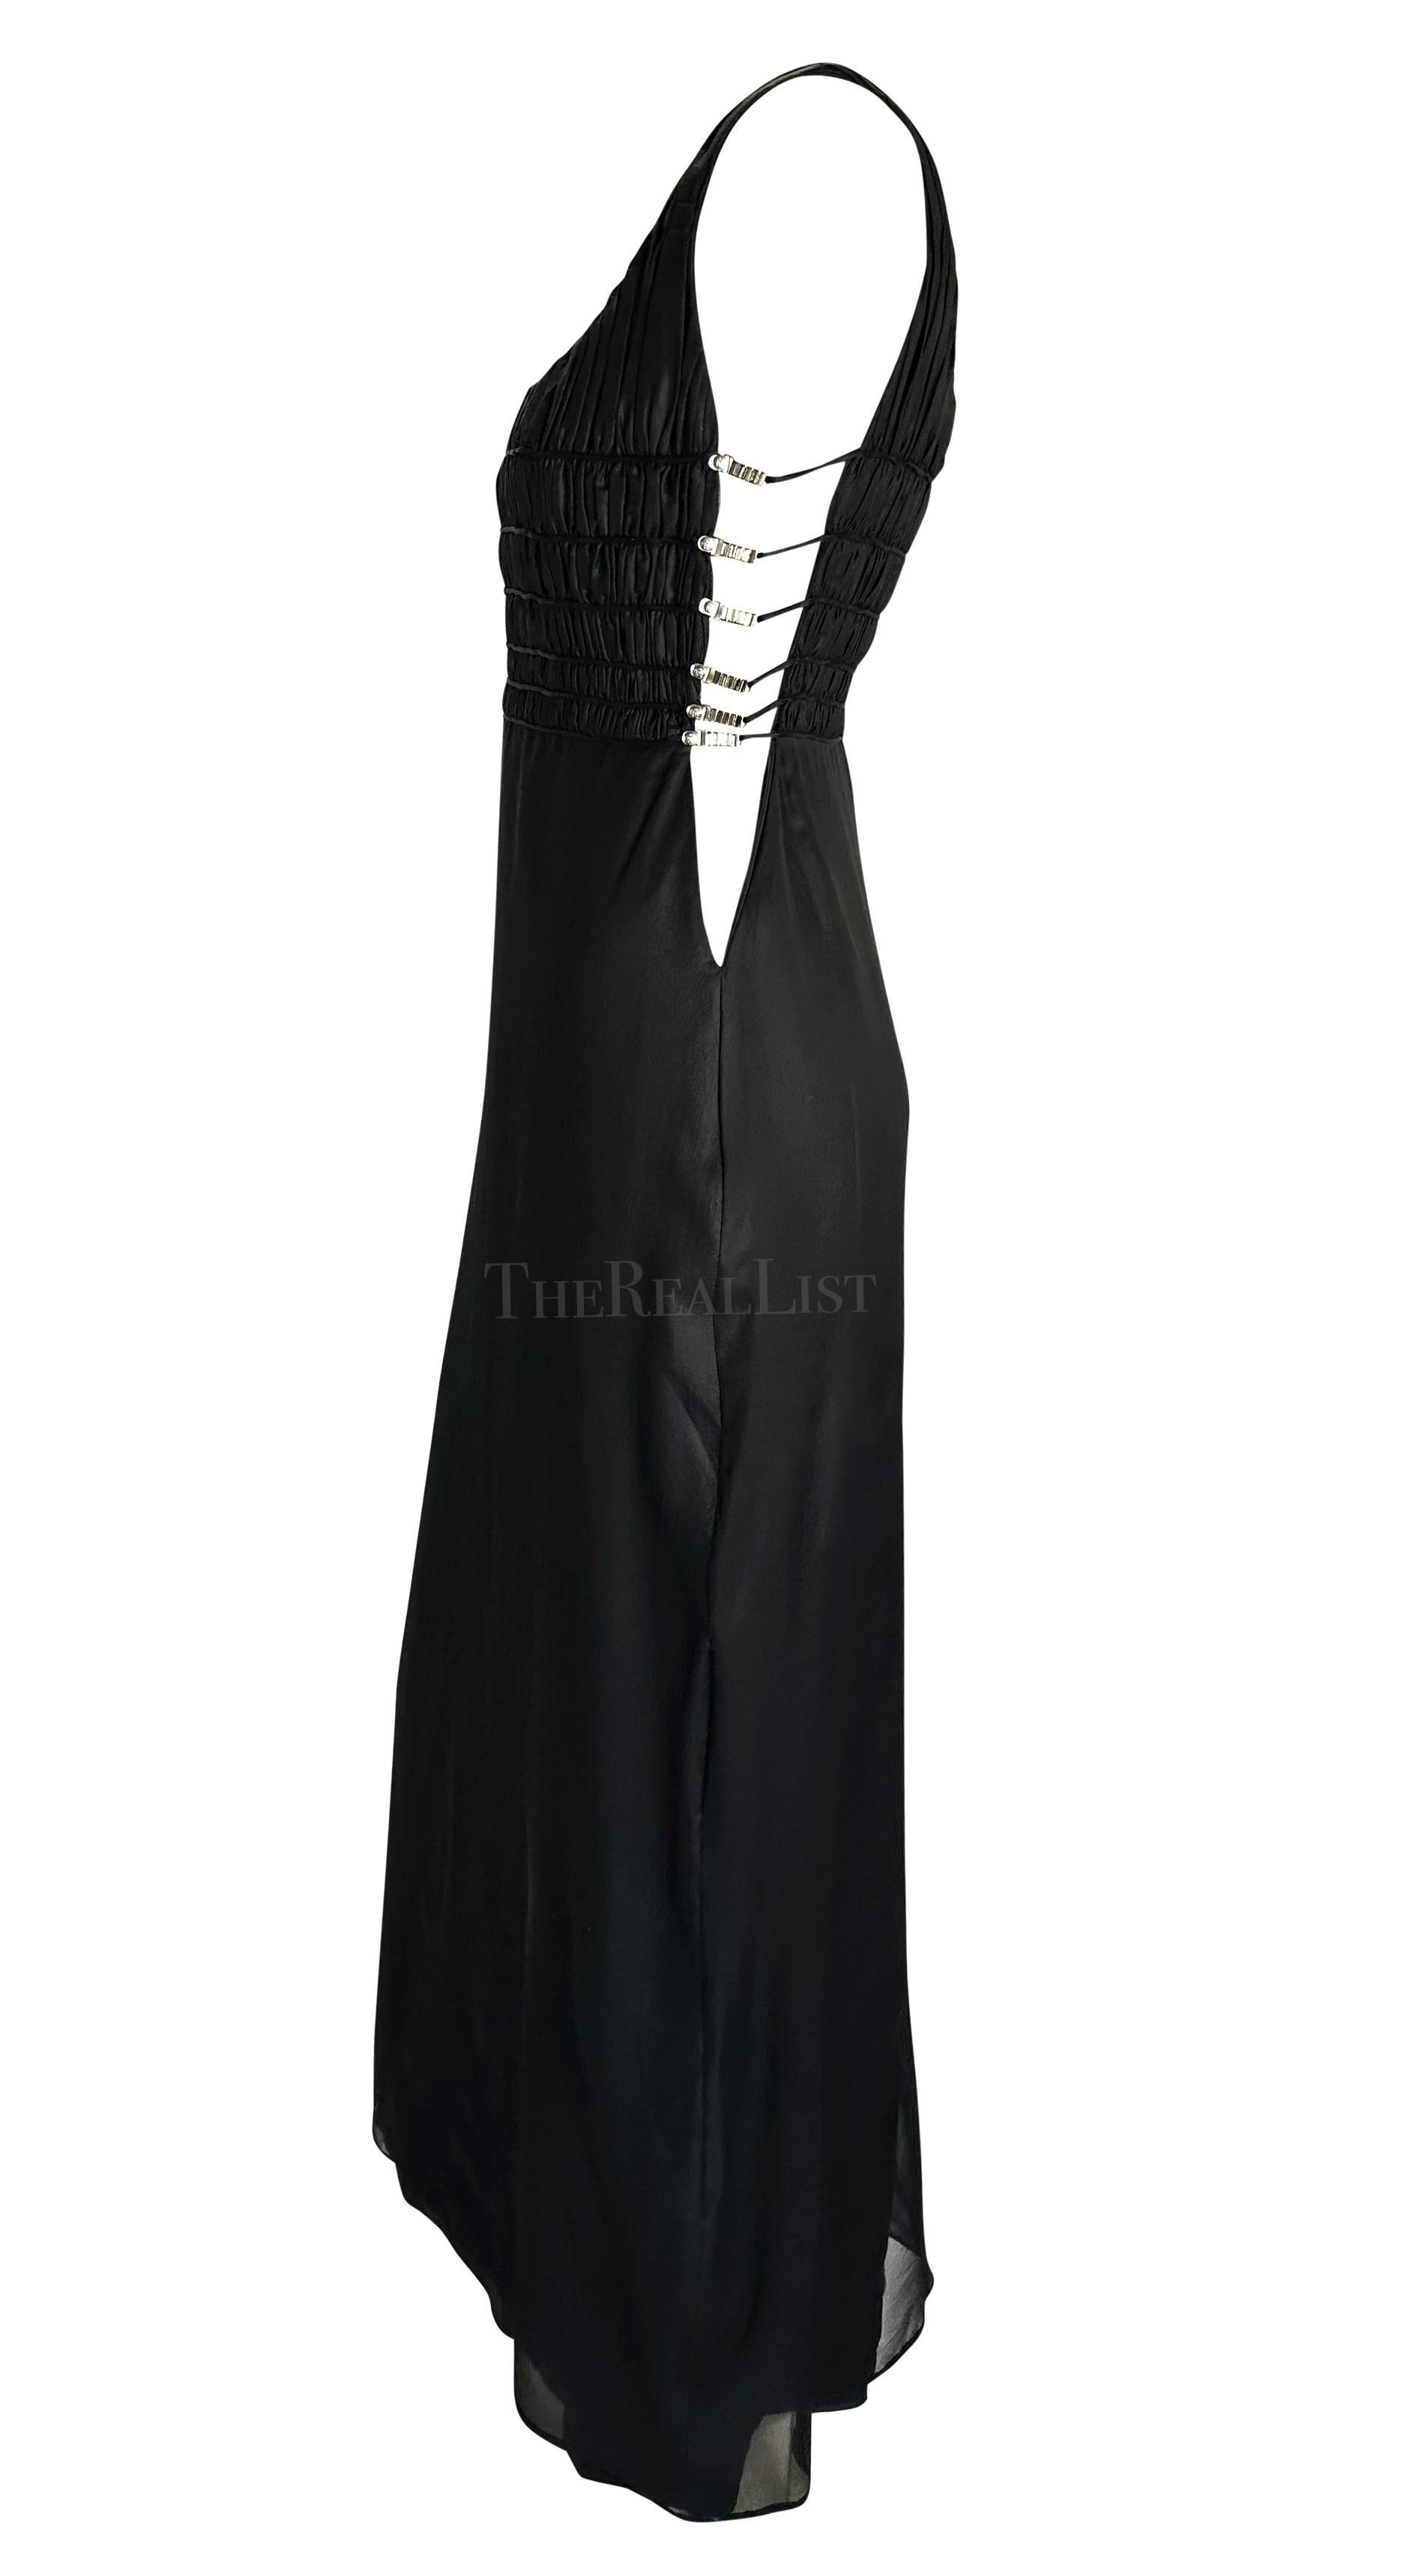 NWT F/W 1998 Gianni Versace by Donatella Black Rhinestone Side Slit Medusa Gown In Excellent Condition For Sale In West Hollywood, CA